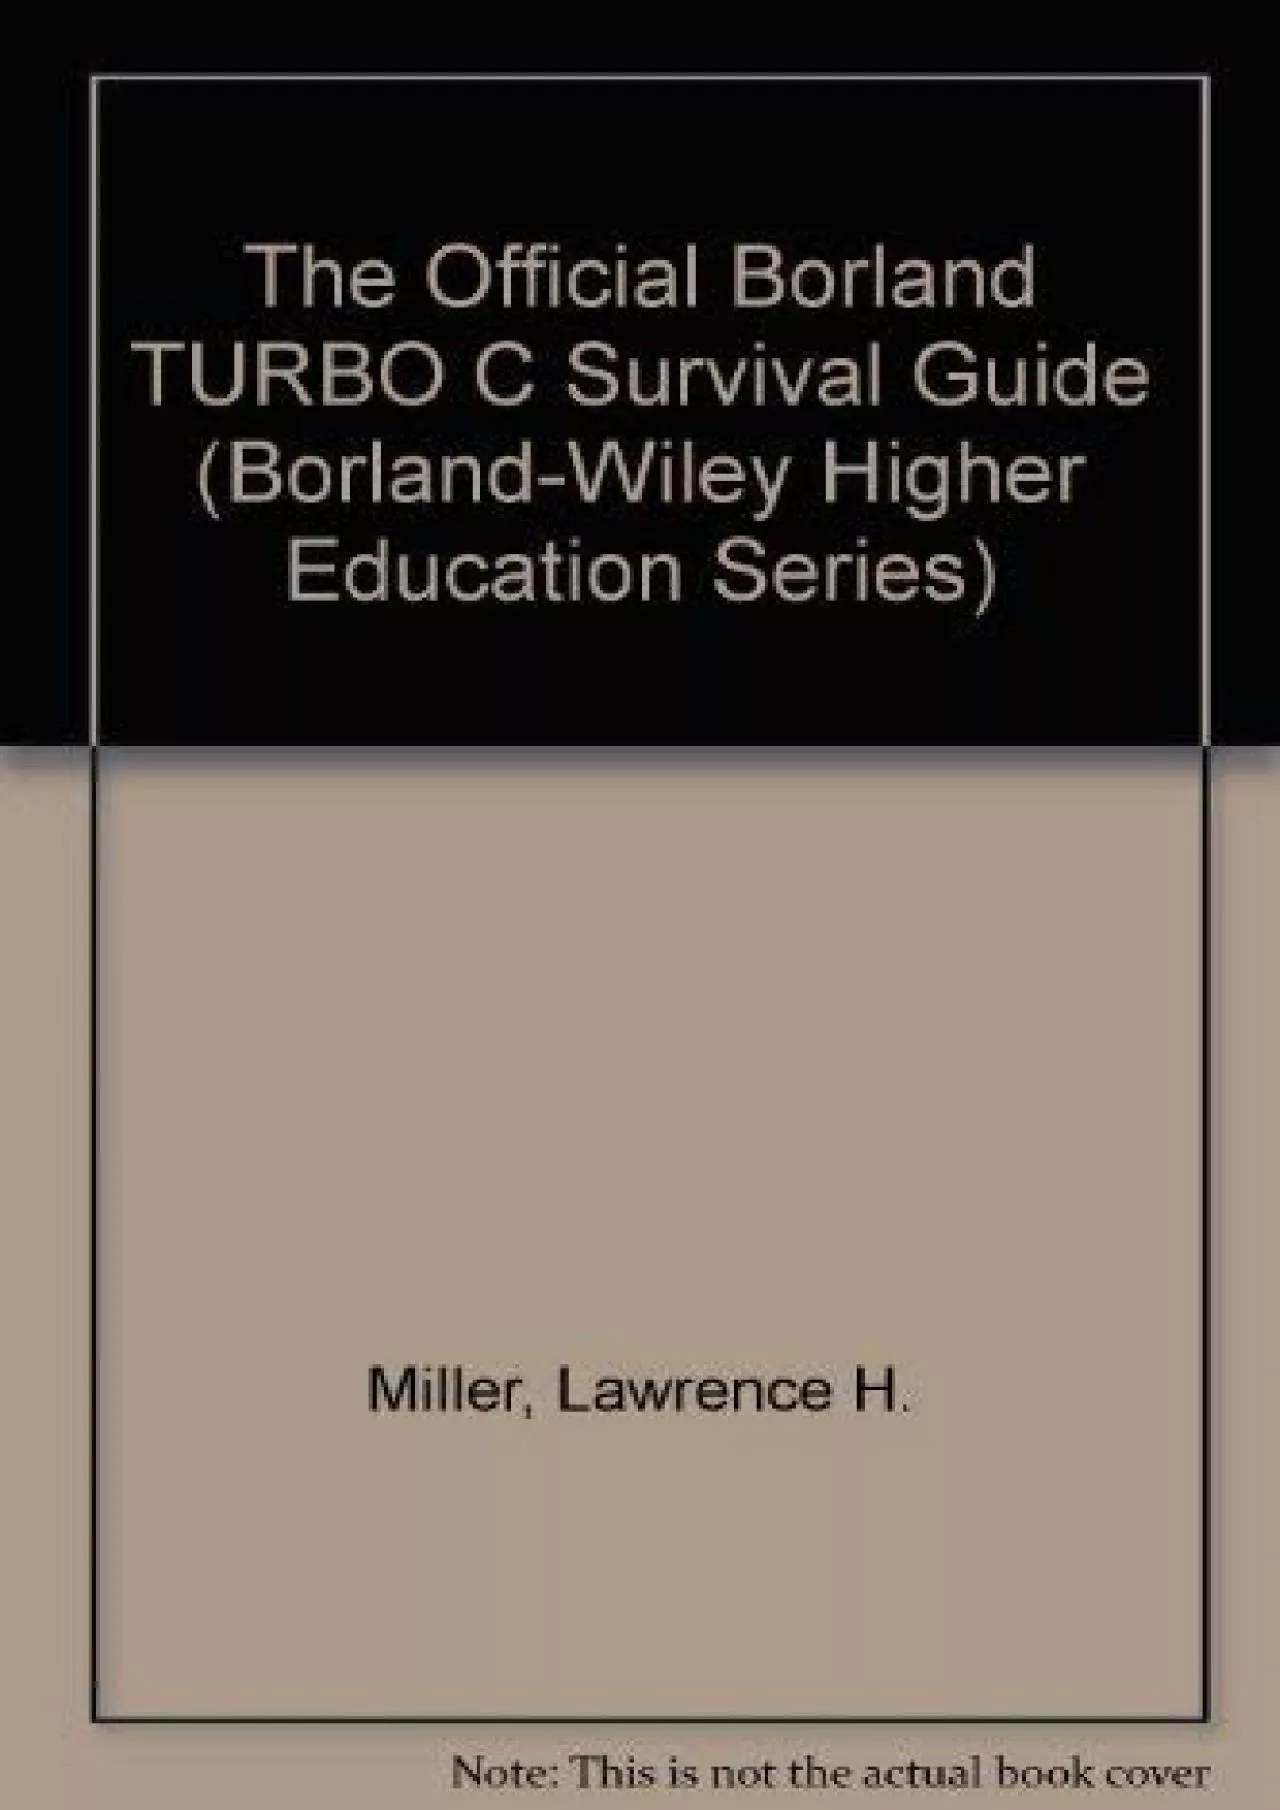 [READING BOOK]-The Official Borland TURBO C Survival Guide (Borland-Wiley Higher Education